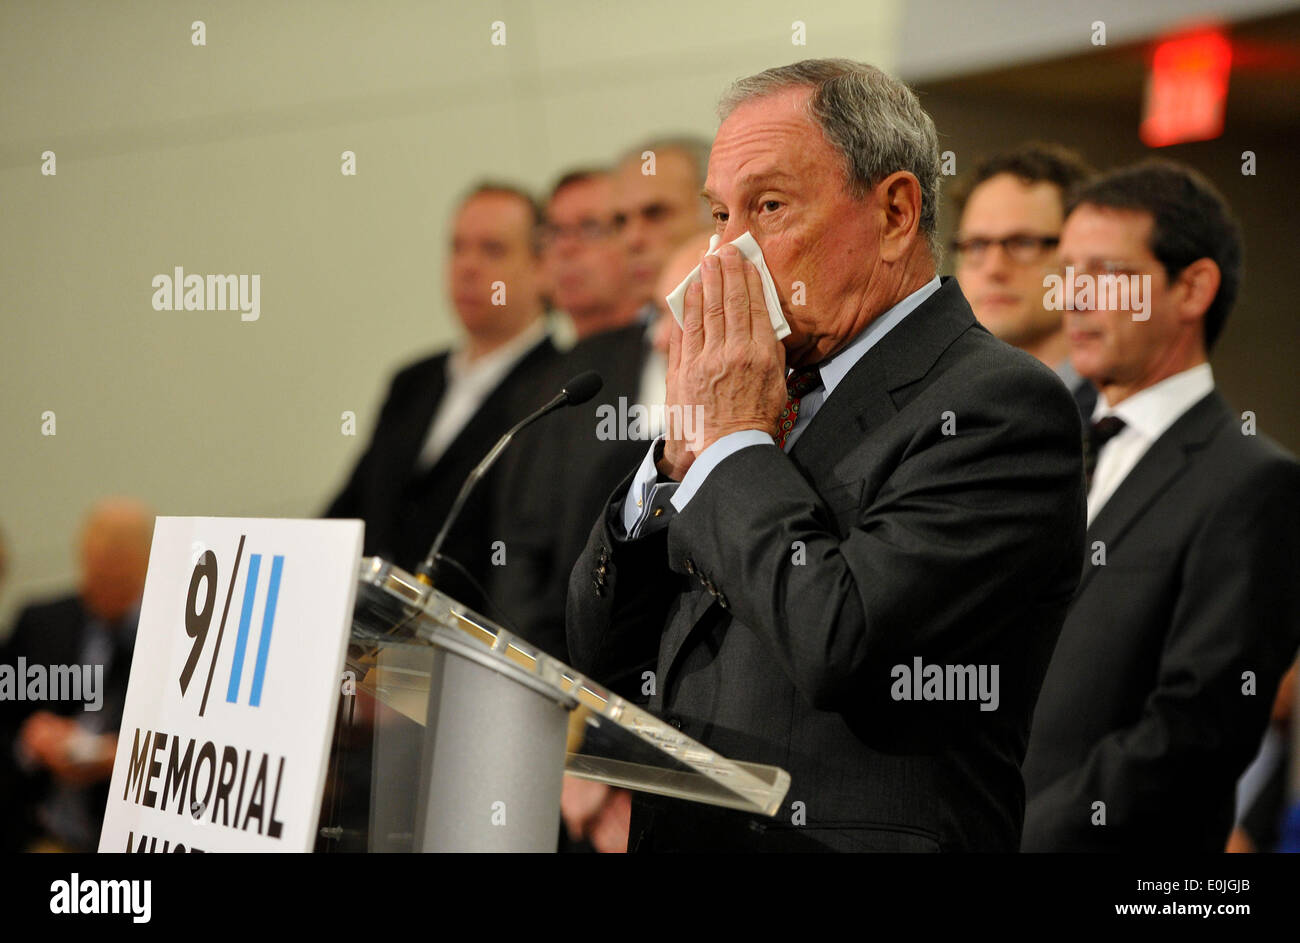 (140514) -- NEW YORK, May 14, 2014 (Xinhua) -- Michael Bloomberg, Chairman of the 9/11 Memorial Museum and Mayor of New York City from 2002-2013 delivers a speech during a preview of the National September 11 Memorial Museum in New York, May 14, 2014. The National September 11 Memorial Museum will serve as the country's principal institution for examining the implications of the events of 9/11, documenting the impact of those events and exploring the continuing significance of September 11, 2001. The Museum's 110,000 square feet of exhibition space is located within the archaeological heart of Stock Photo